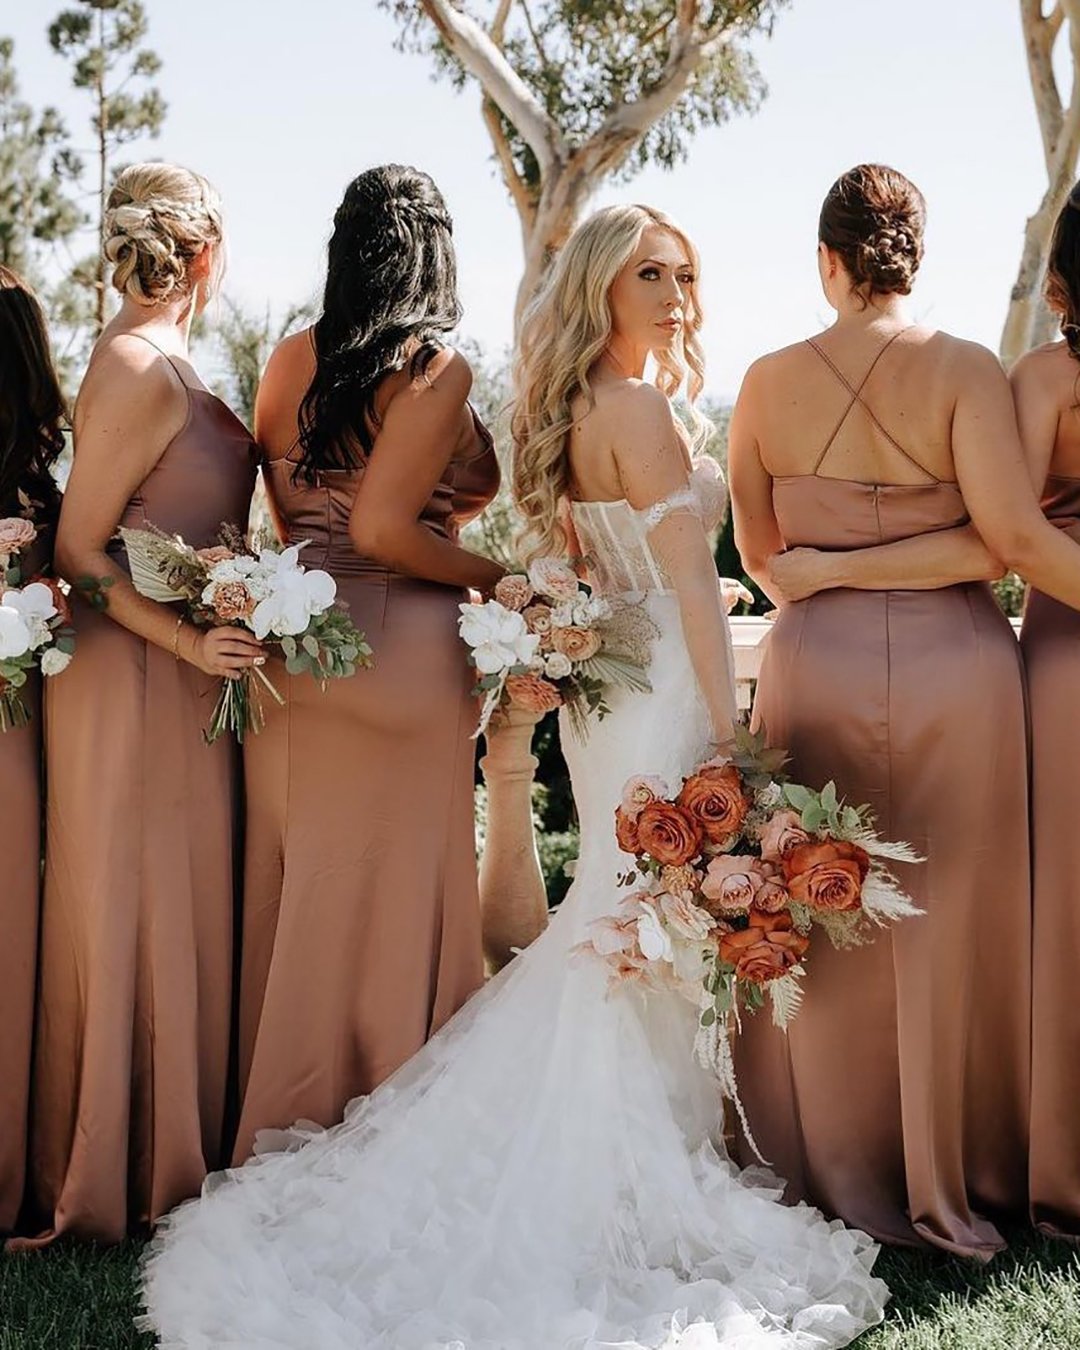 rust wedding theme bridesmaid from back thelittlebranch